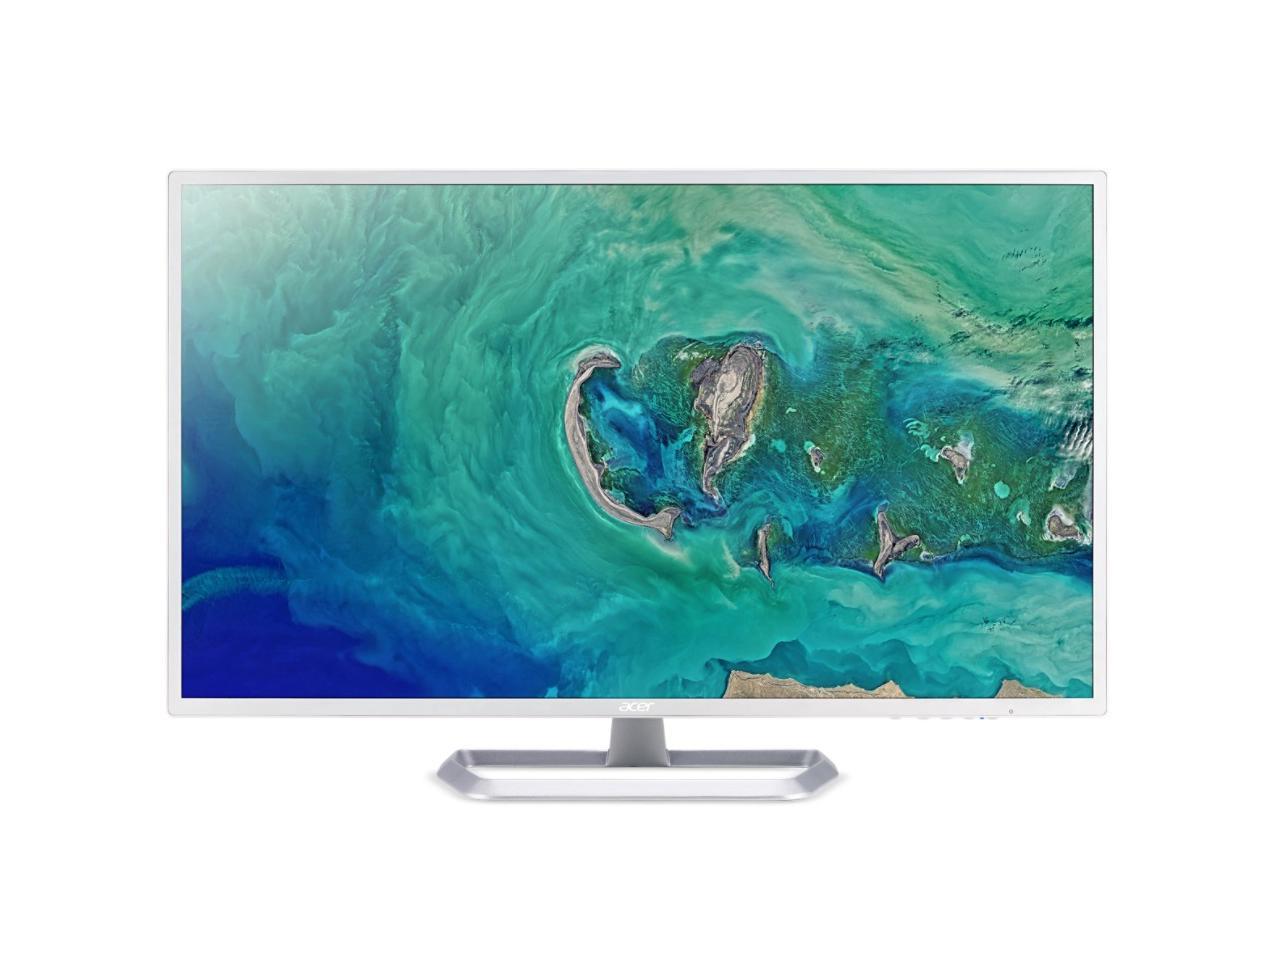 Acer EB321HQ 32 inch LCD Monitor